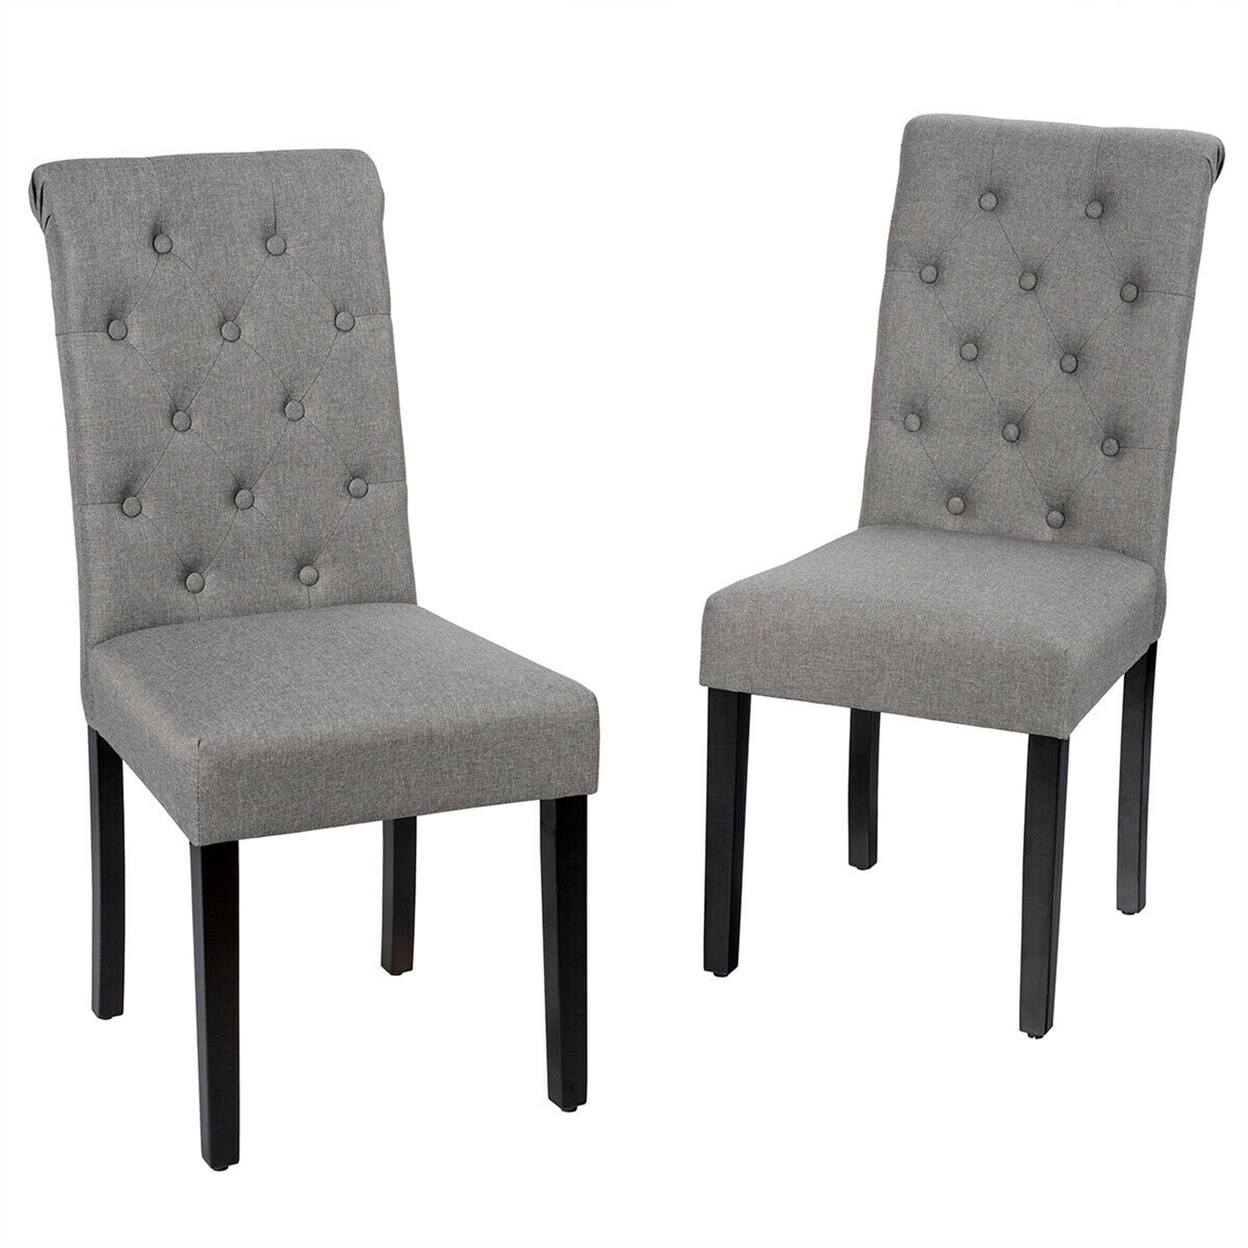 2PCS Upholstered Dining Chair High Back Armless Chair W/ Wooden Legs - Grey